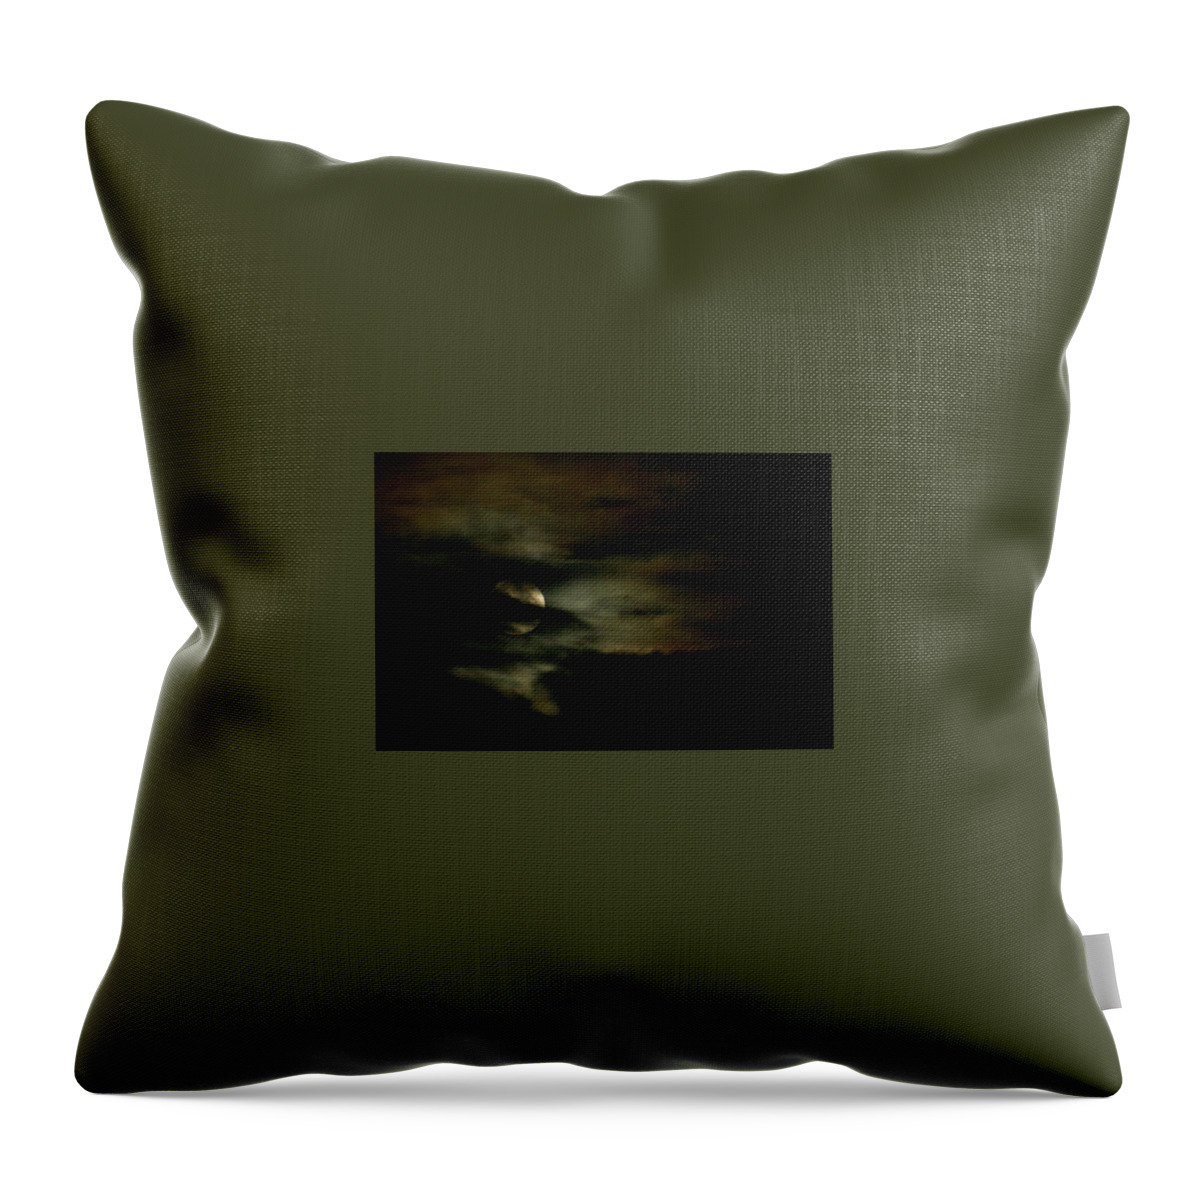  Throw Pillow featuring the photograph Super Moon Eclipse by Brad Nellis